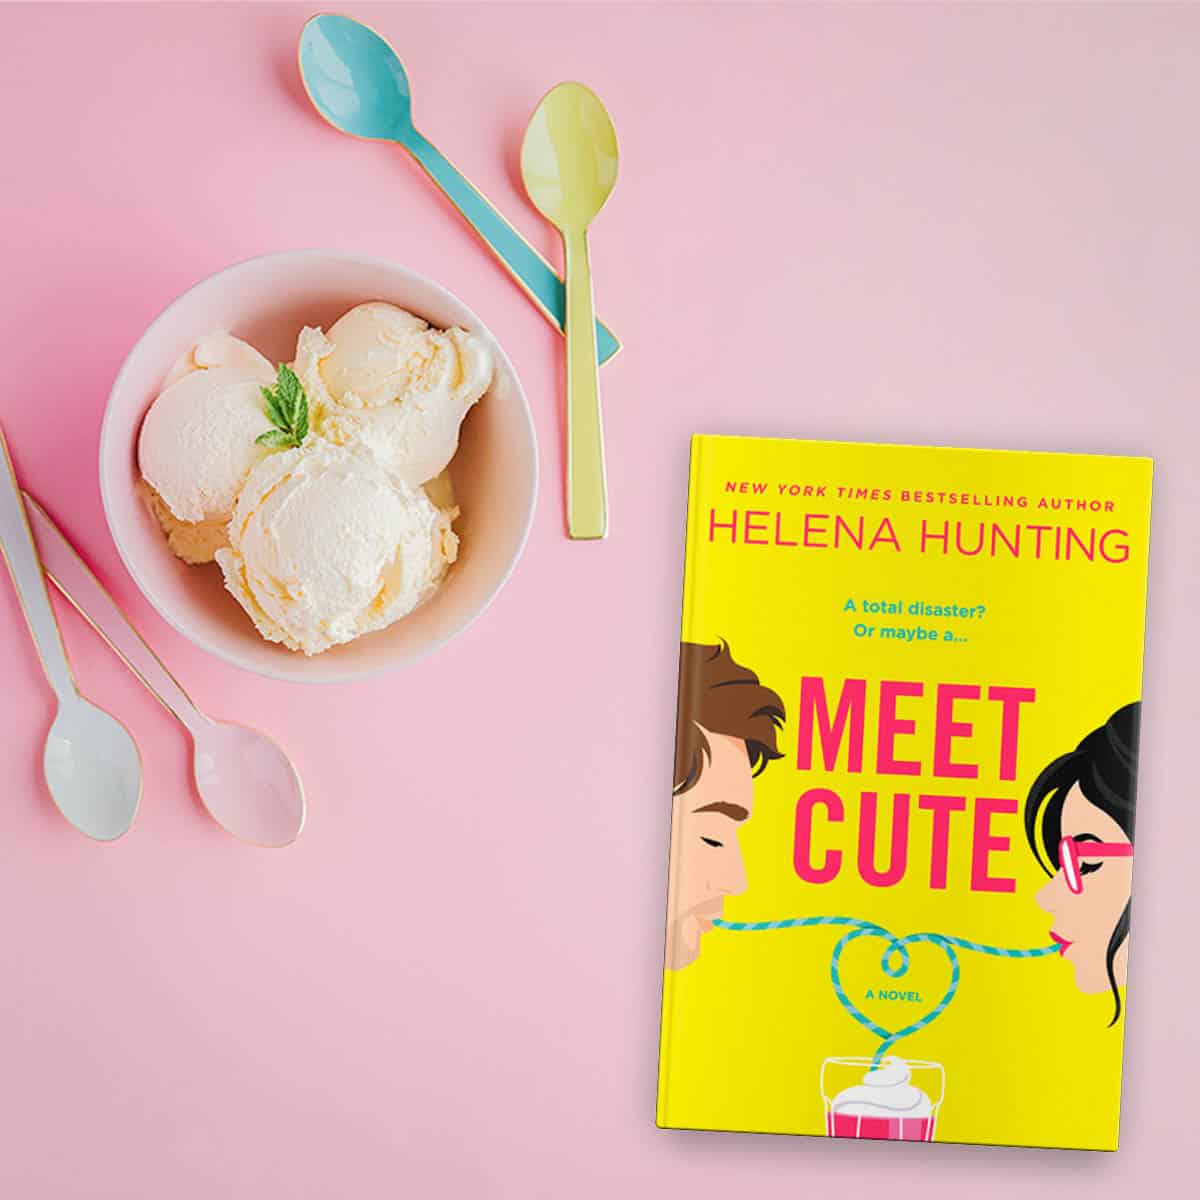 Meet Cute by Helena Hunting, the adorable romance between a famous heartthrob who falls for his ultimate fangirl is both unexpectedly deep and emotional on several levels.